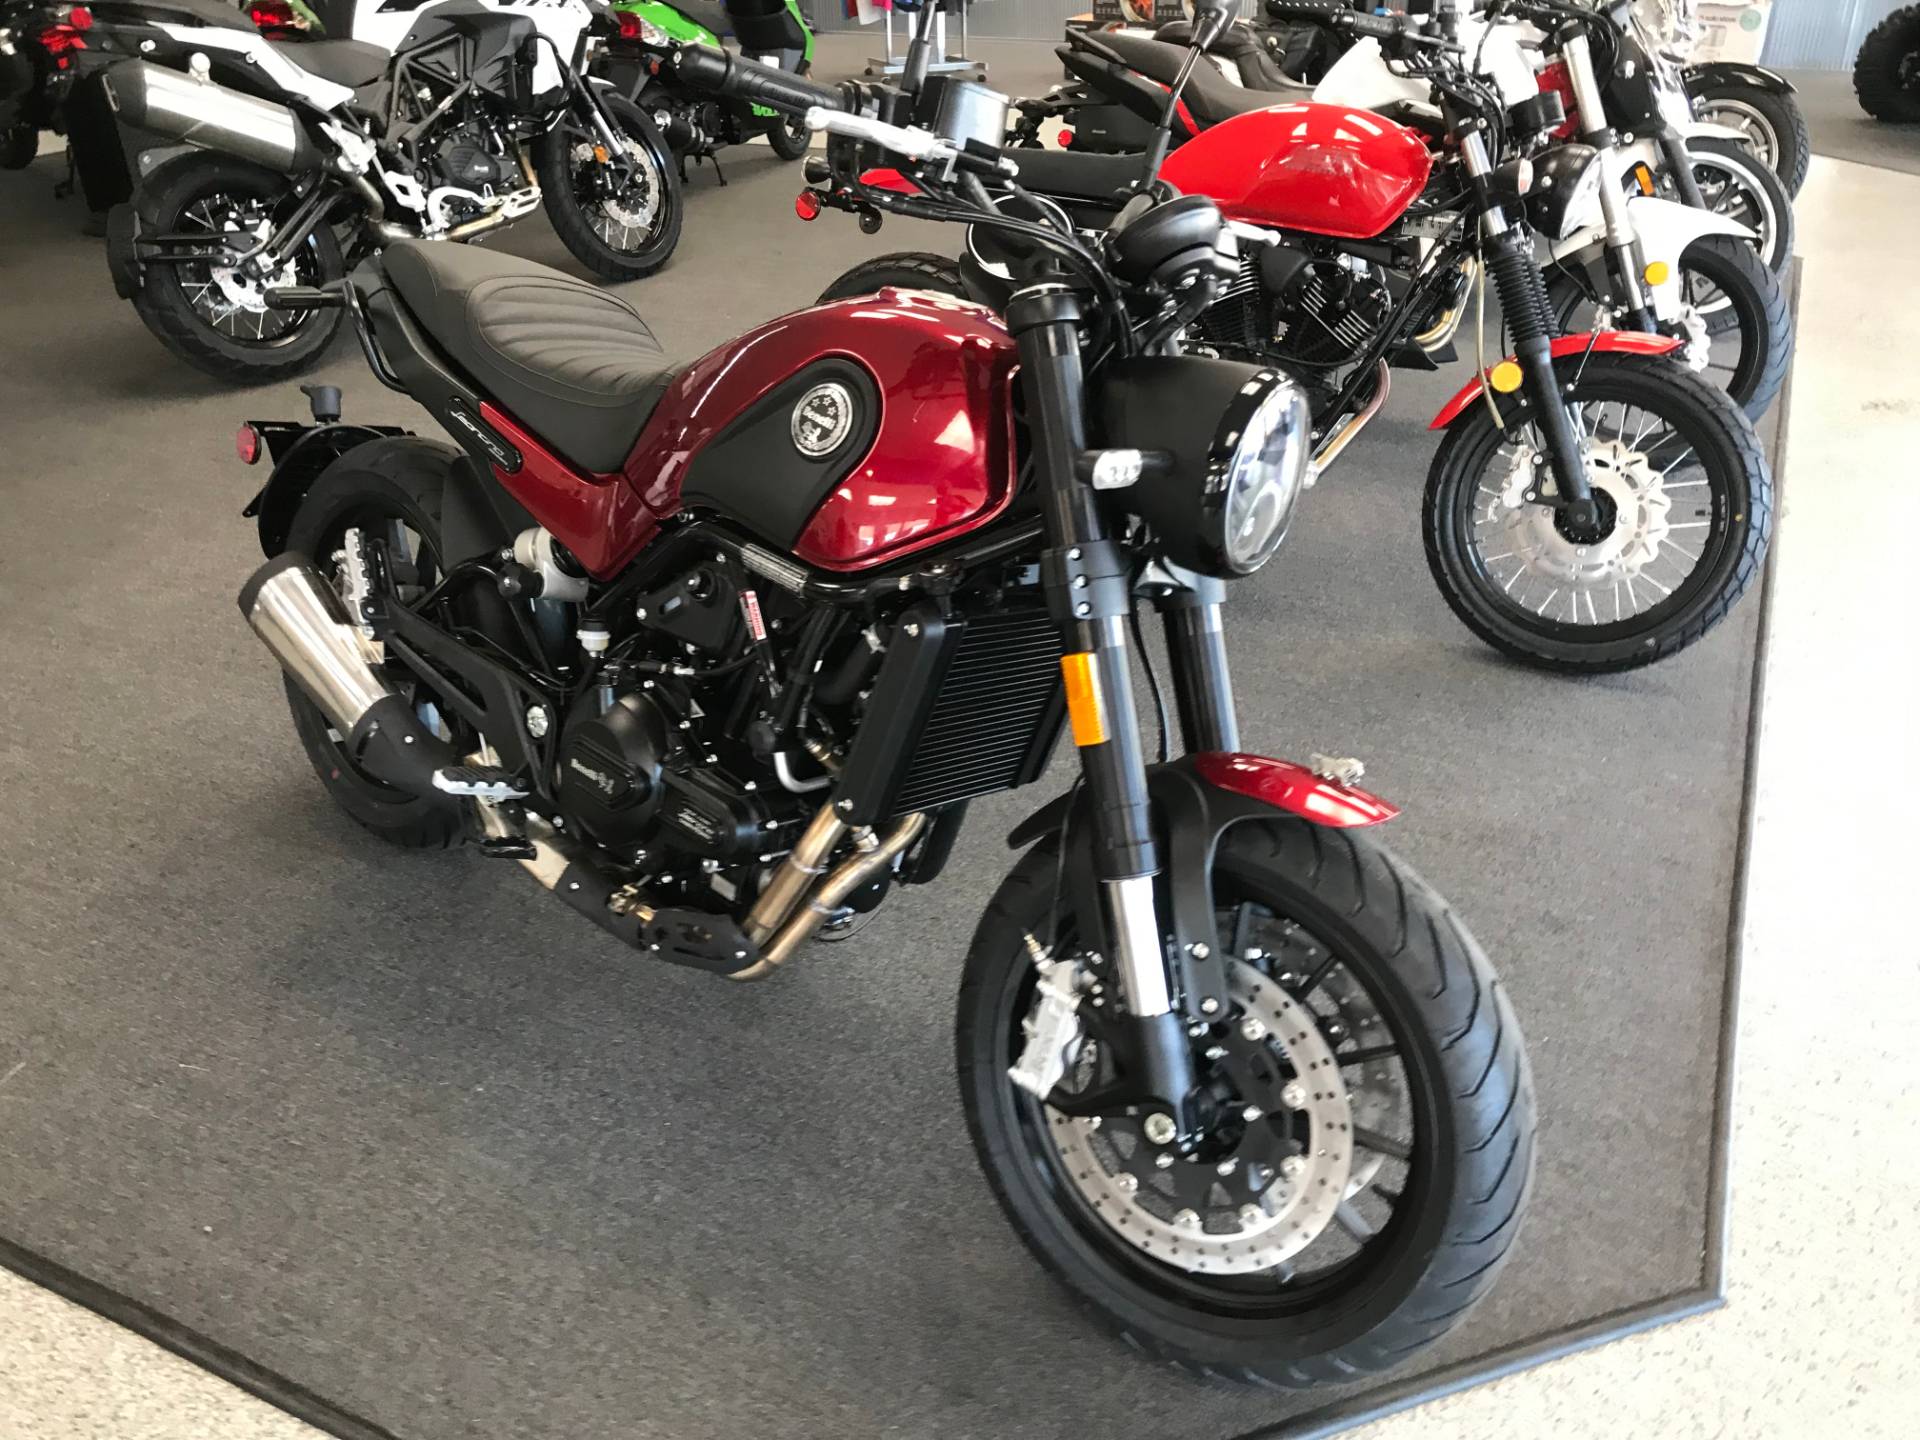 New 2021 Benelli Leoncino 500 Motorcycles in Coloma, MI | Stock Number ...